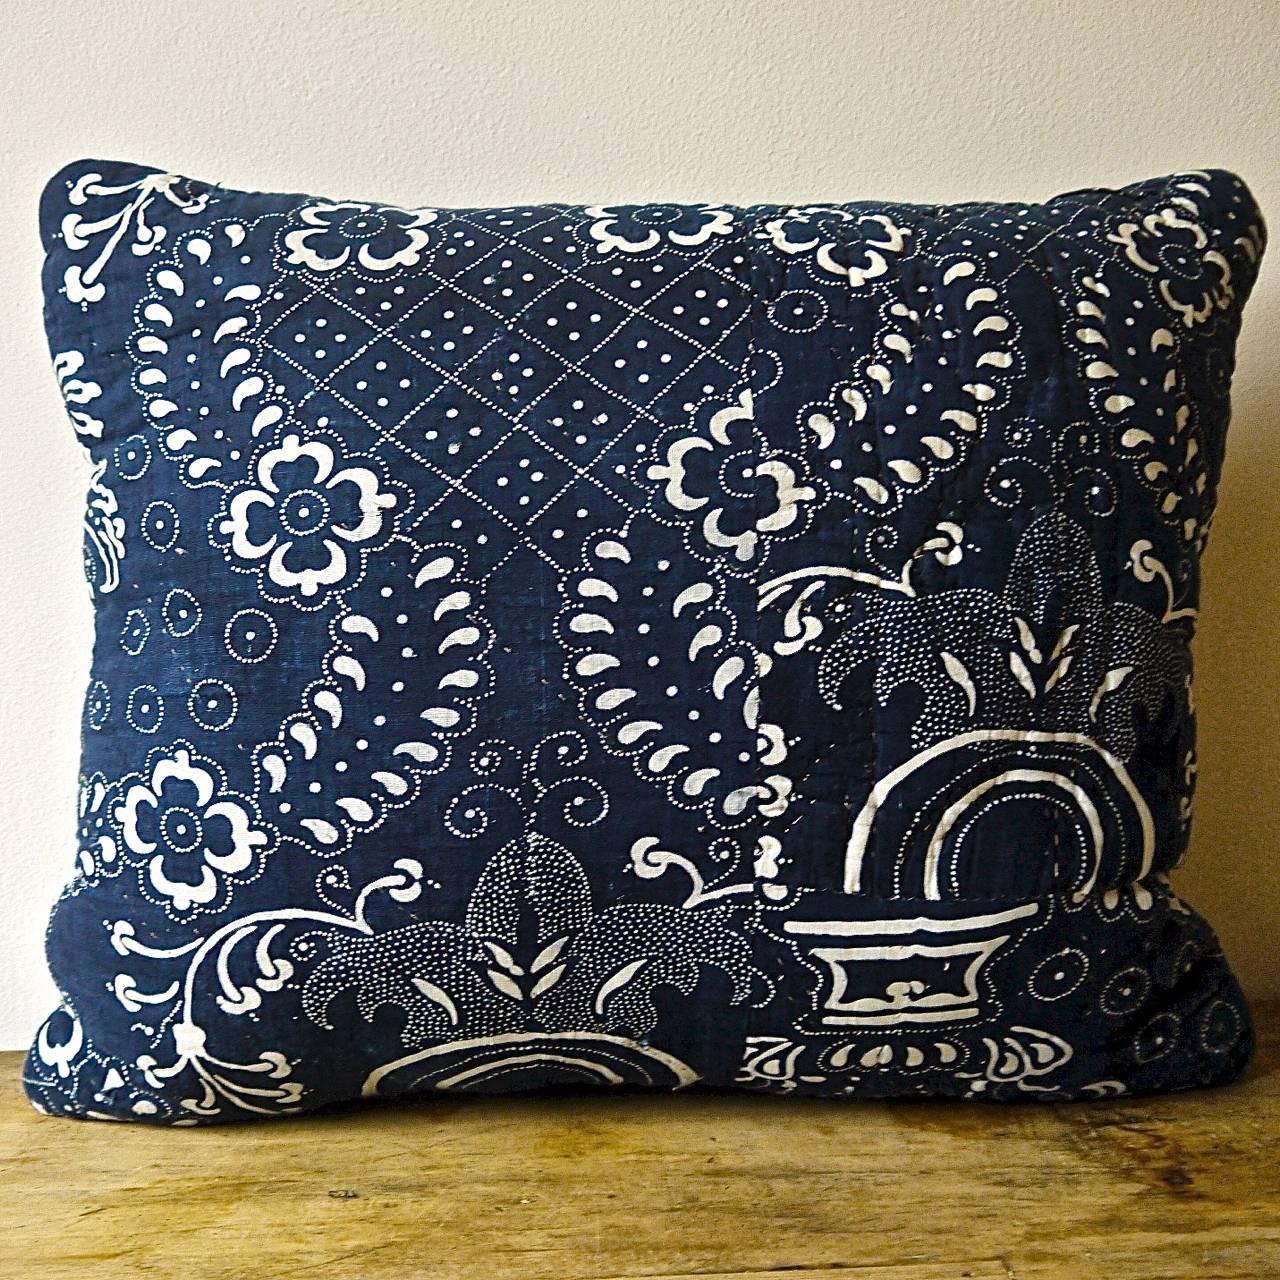 French Toile de Nimes indigo resist block printed cotton cushion. A striking design of stylized pomegranite and floral motifs. Simply quilted and printed on a soft cotton and backed in a dyed 19th century French linen. Slipstitched closed with a